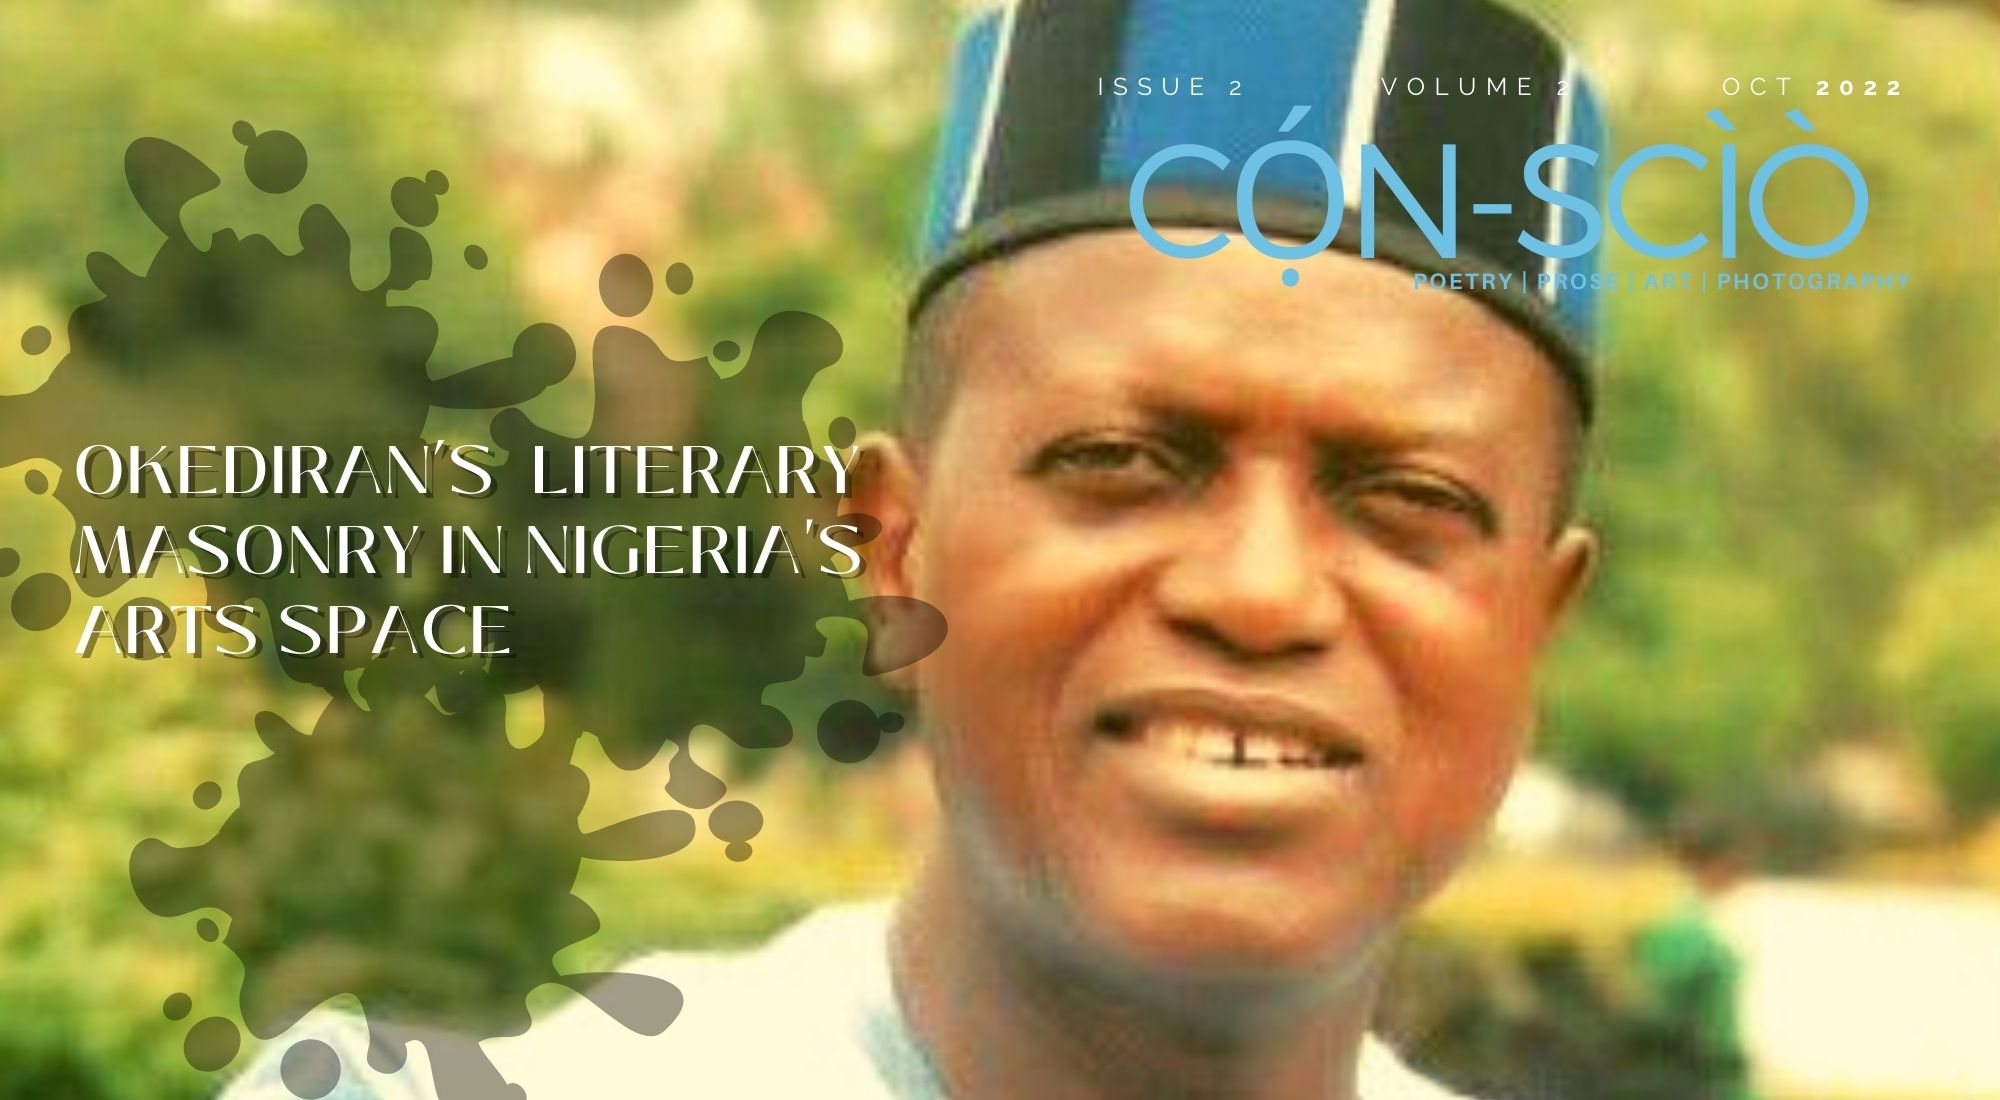 BUILDING A COMMUNITY OF NOTABLE AFRICAN WRITERS: WALE OKEDIRAN’S REMARKABLE LITERARY MASONRY IN NIGERIA’S ARTS SPACE | A CỌ́N-SCÌÒ PACESETTER PROFILE